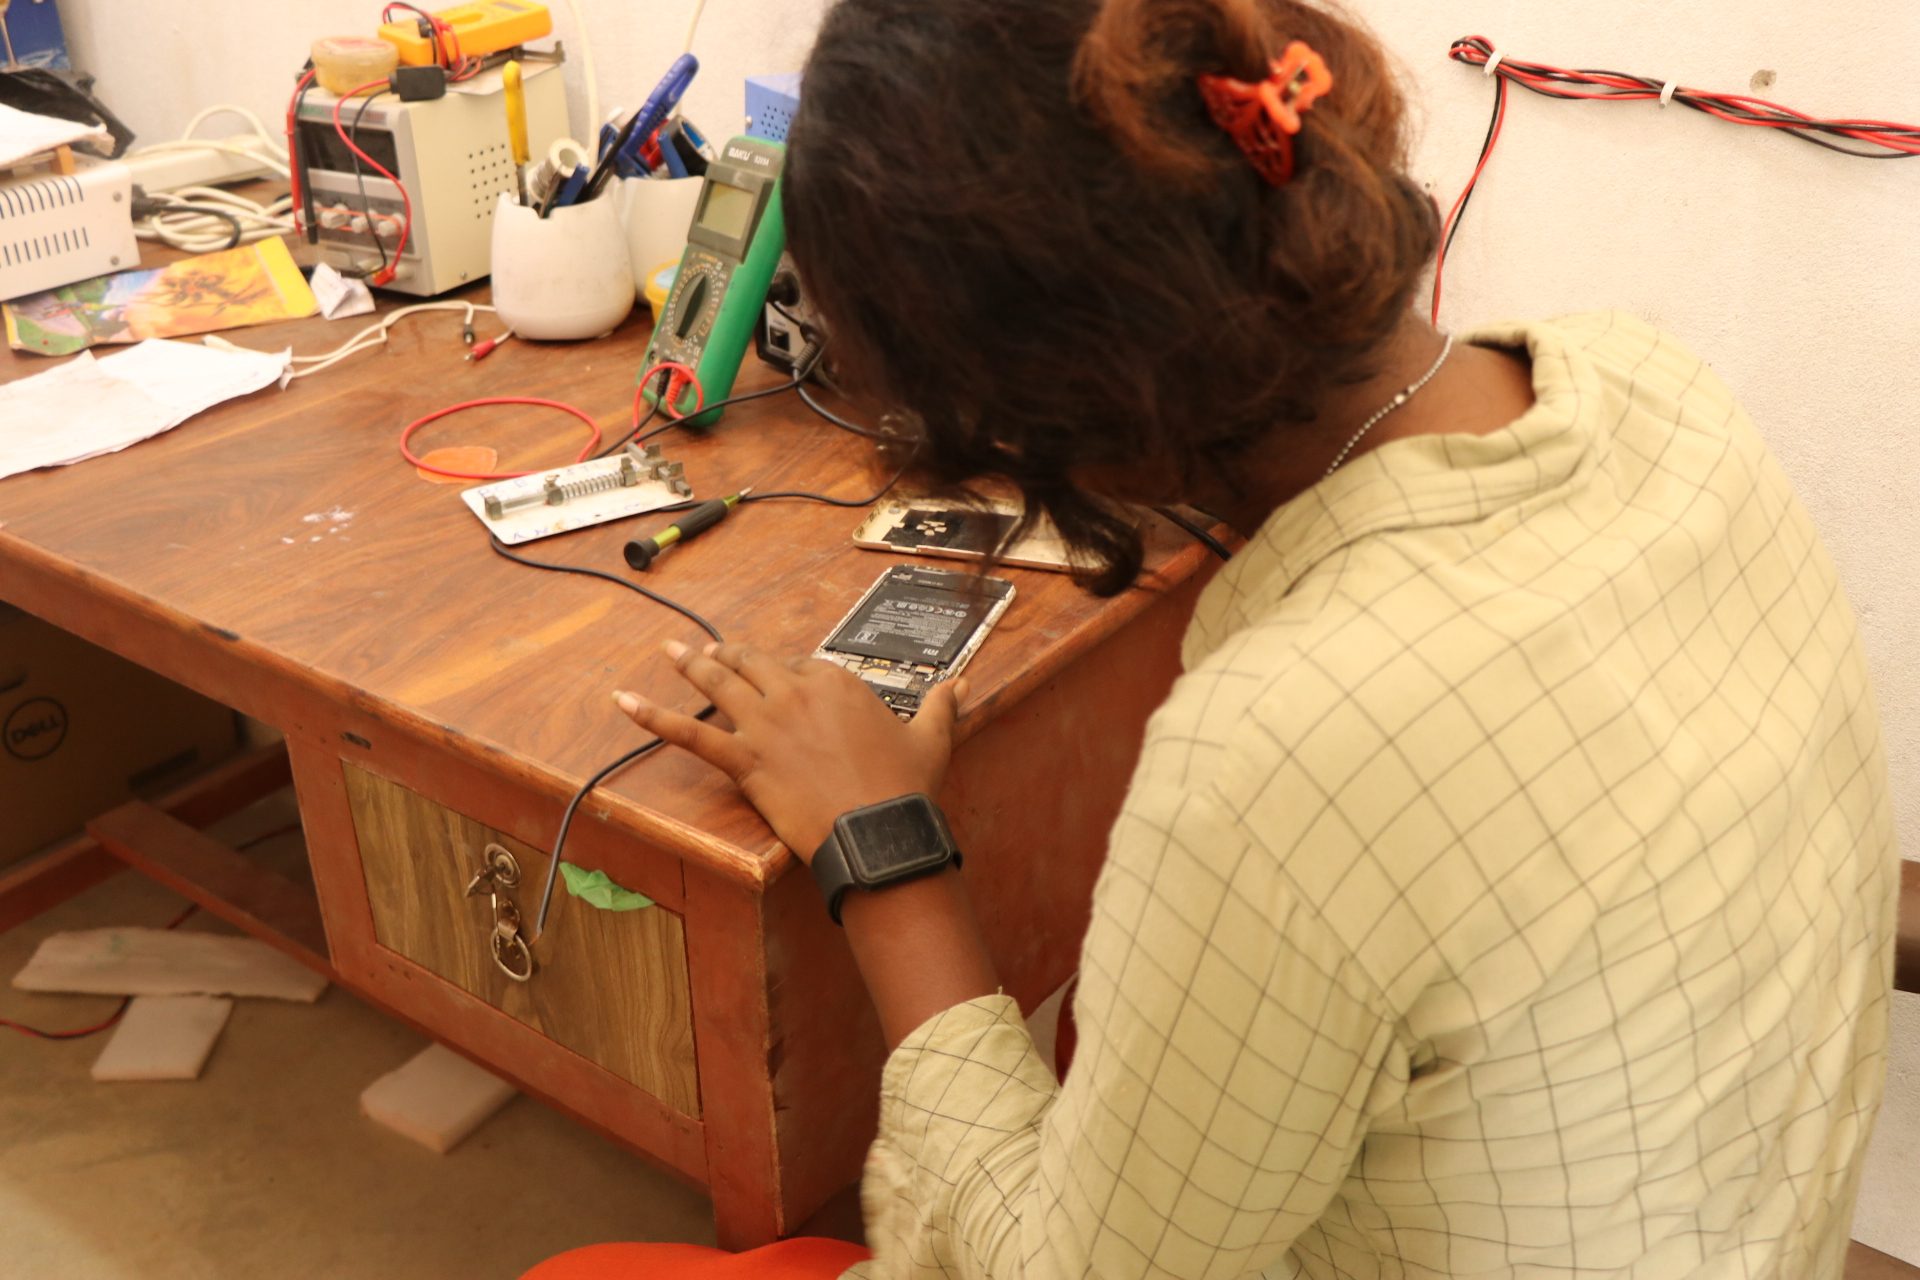 Anjali leans over the desk while repairing a phone. 